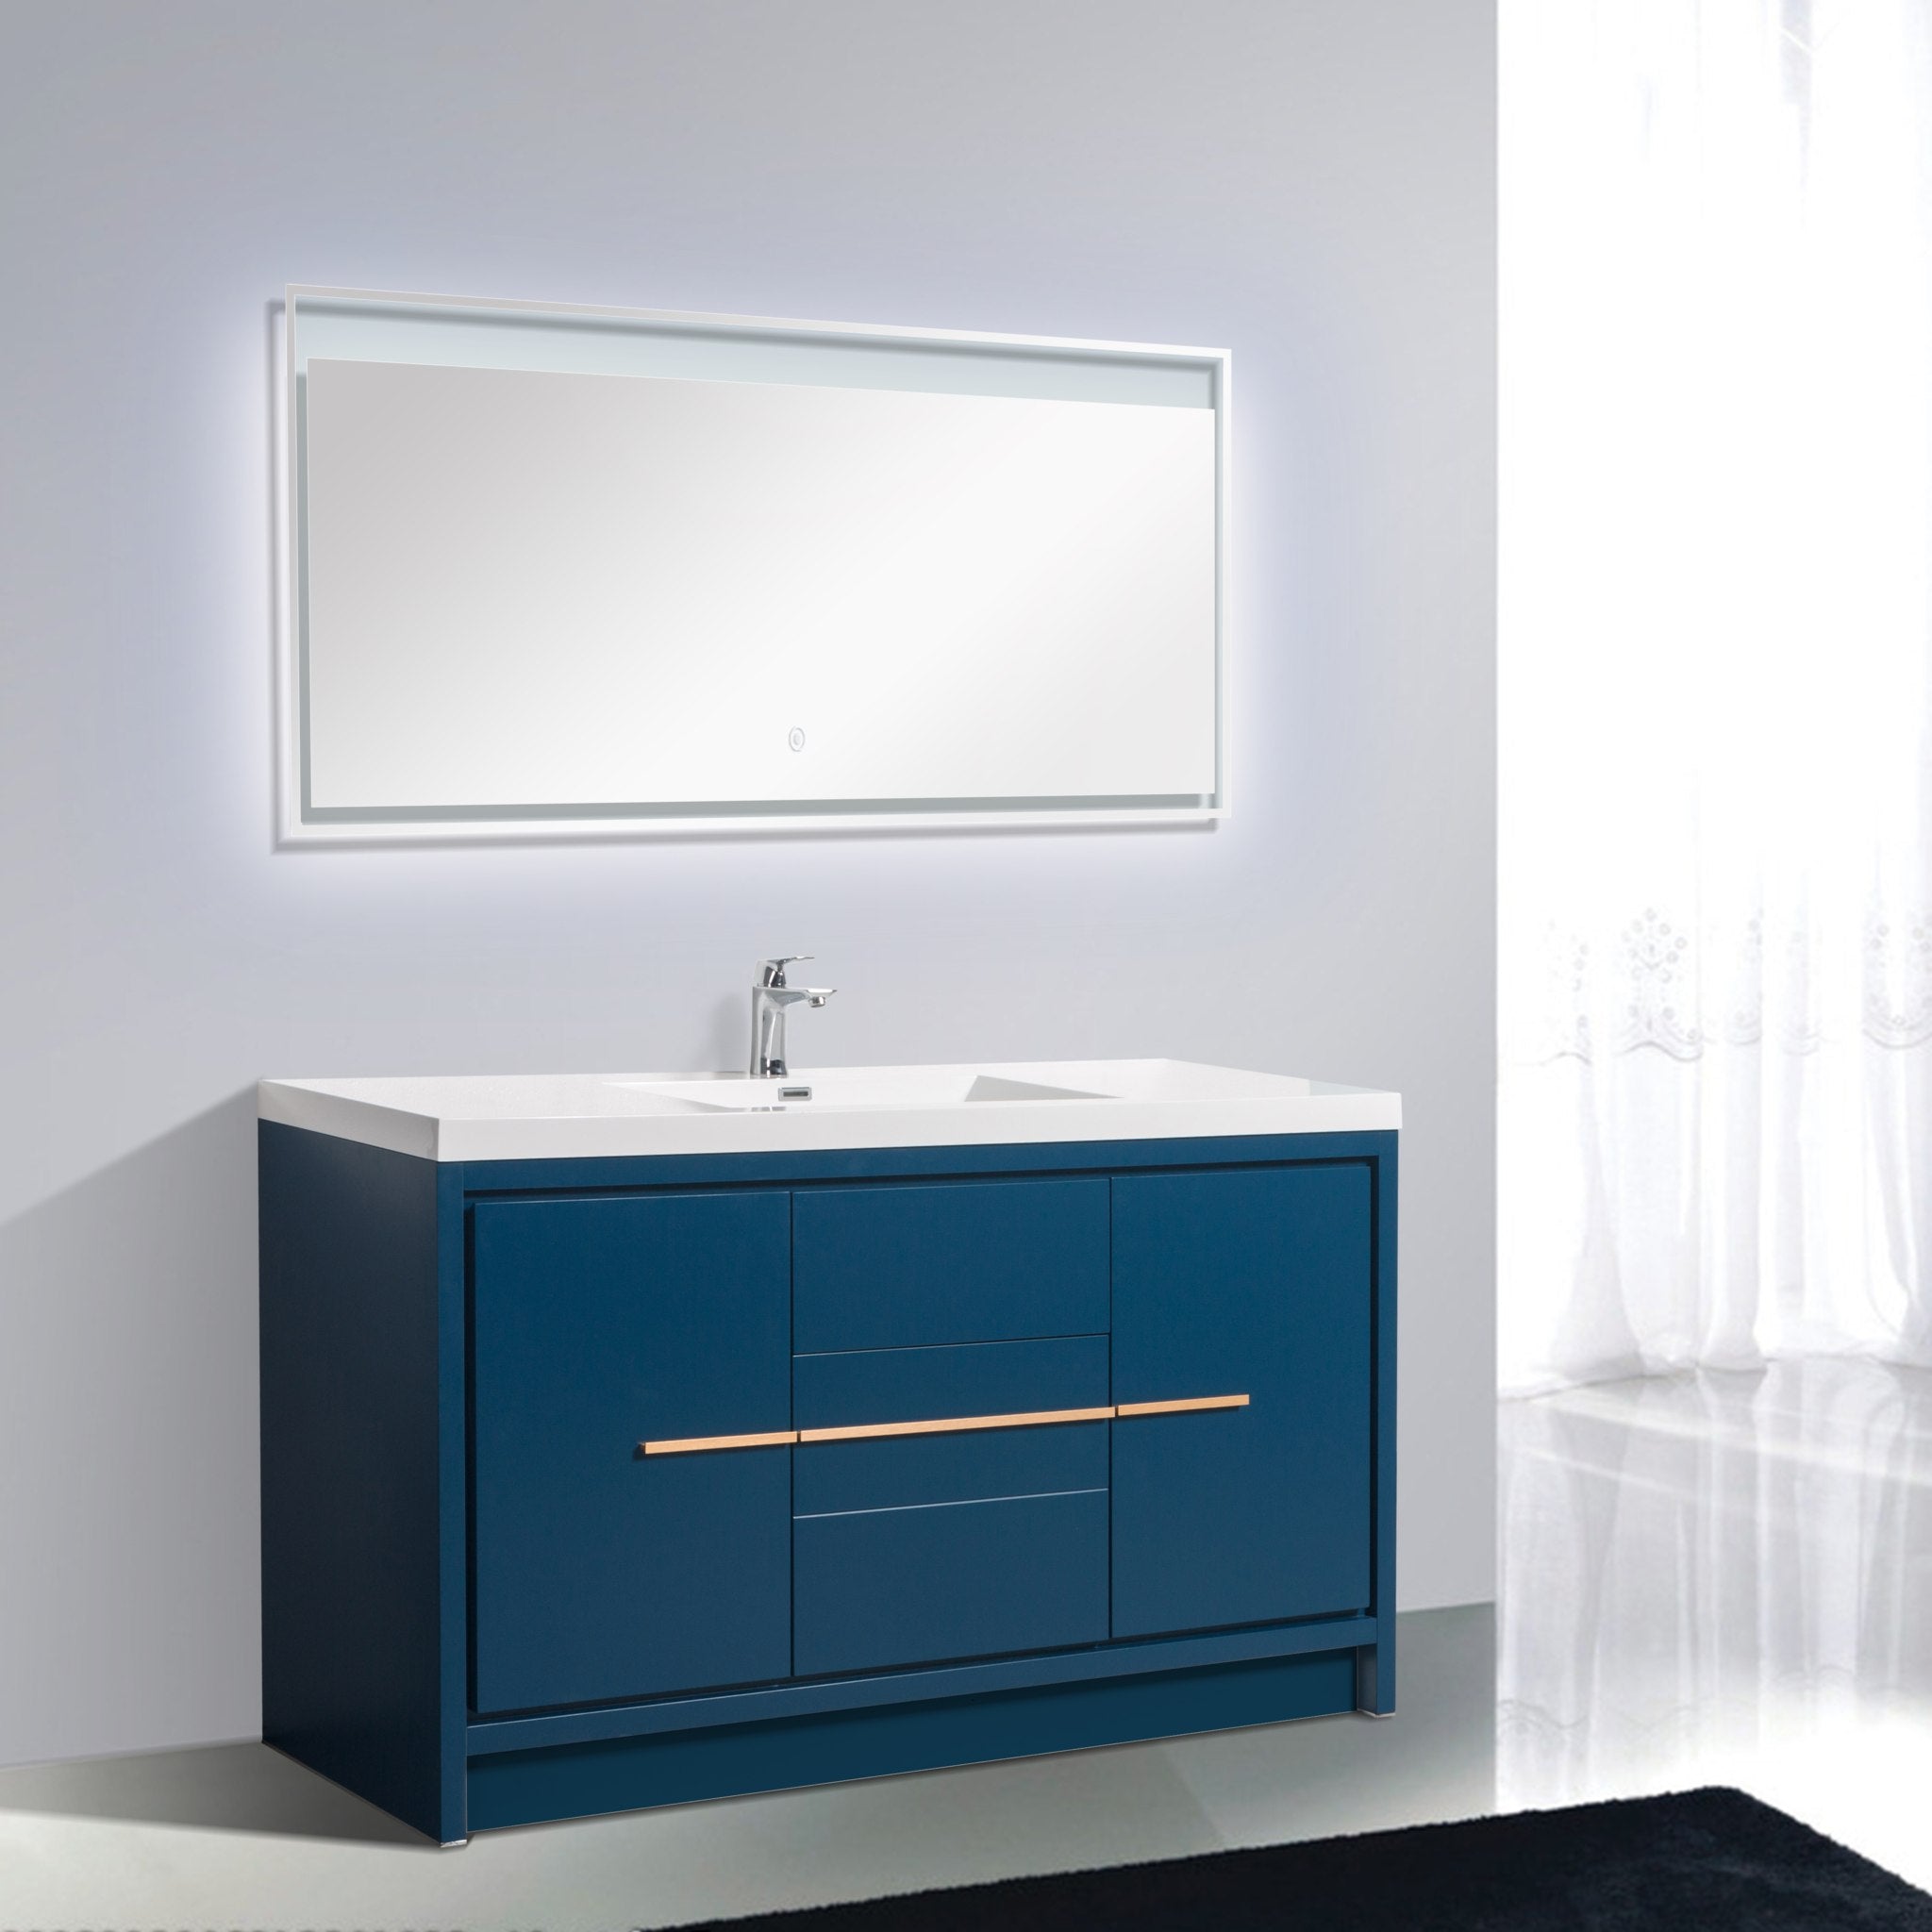 Granada 59 Matte Blue With Brush Rose Gold Handle Cabinet, Square Cultured Marble Single Sink, Free Standing Modern Vanity Set